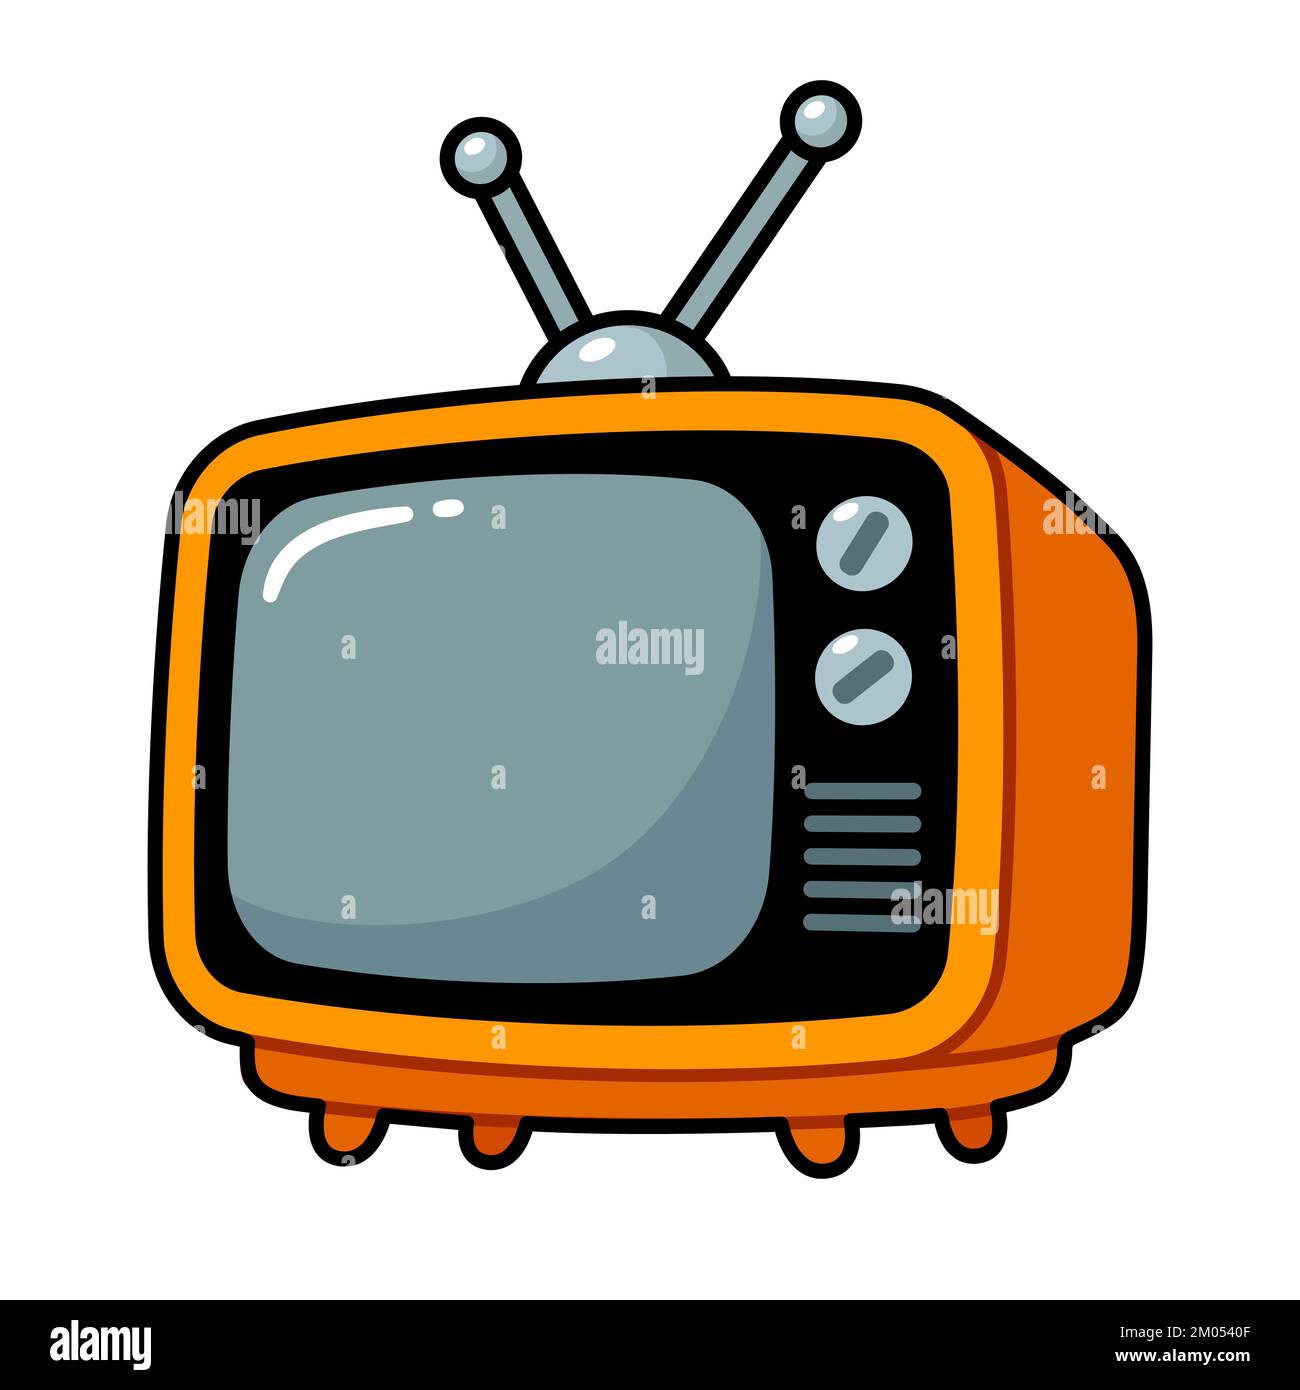 Vintage television set in cute cartoon style. Orange TV with antenna. Vector clip art illustration. Stock Vector